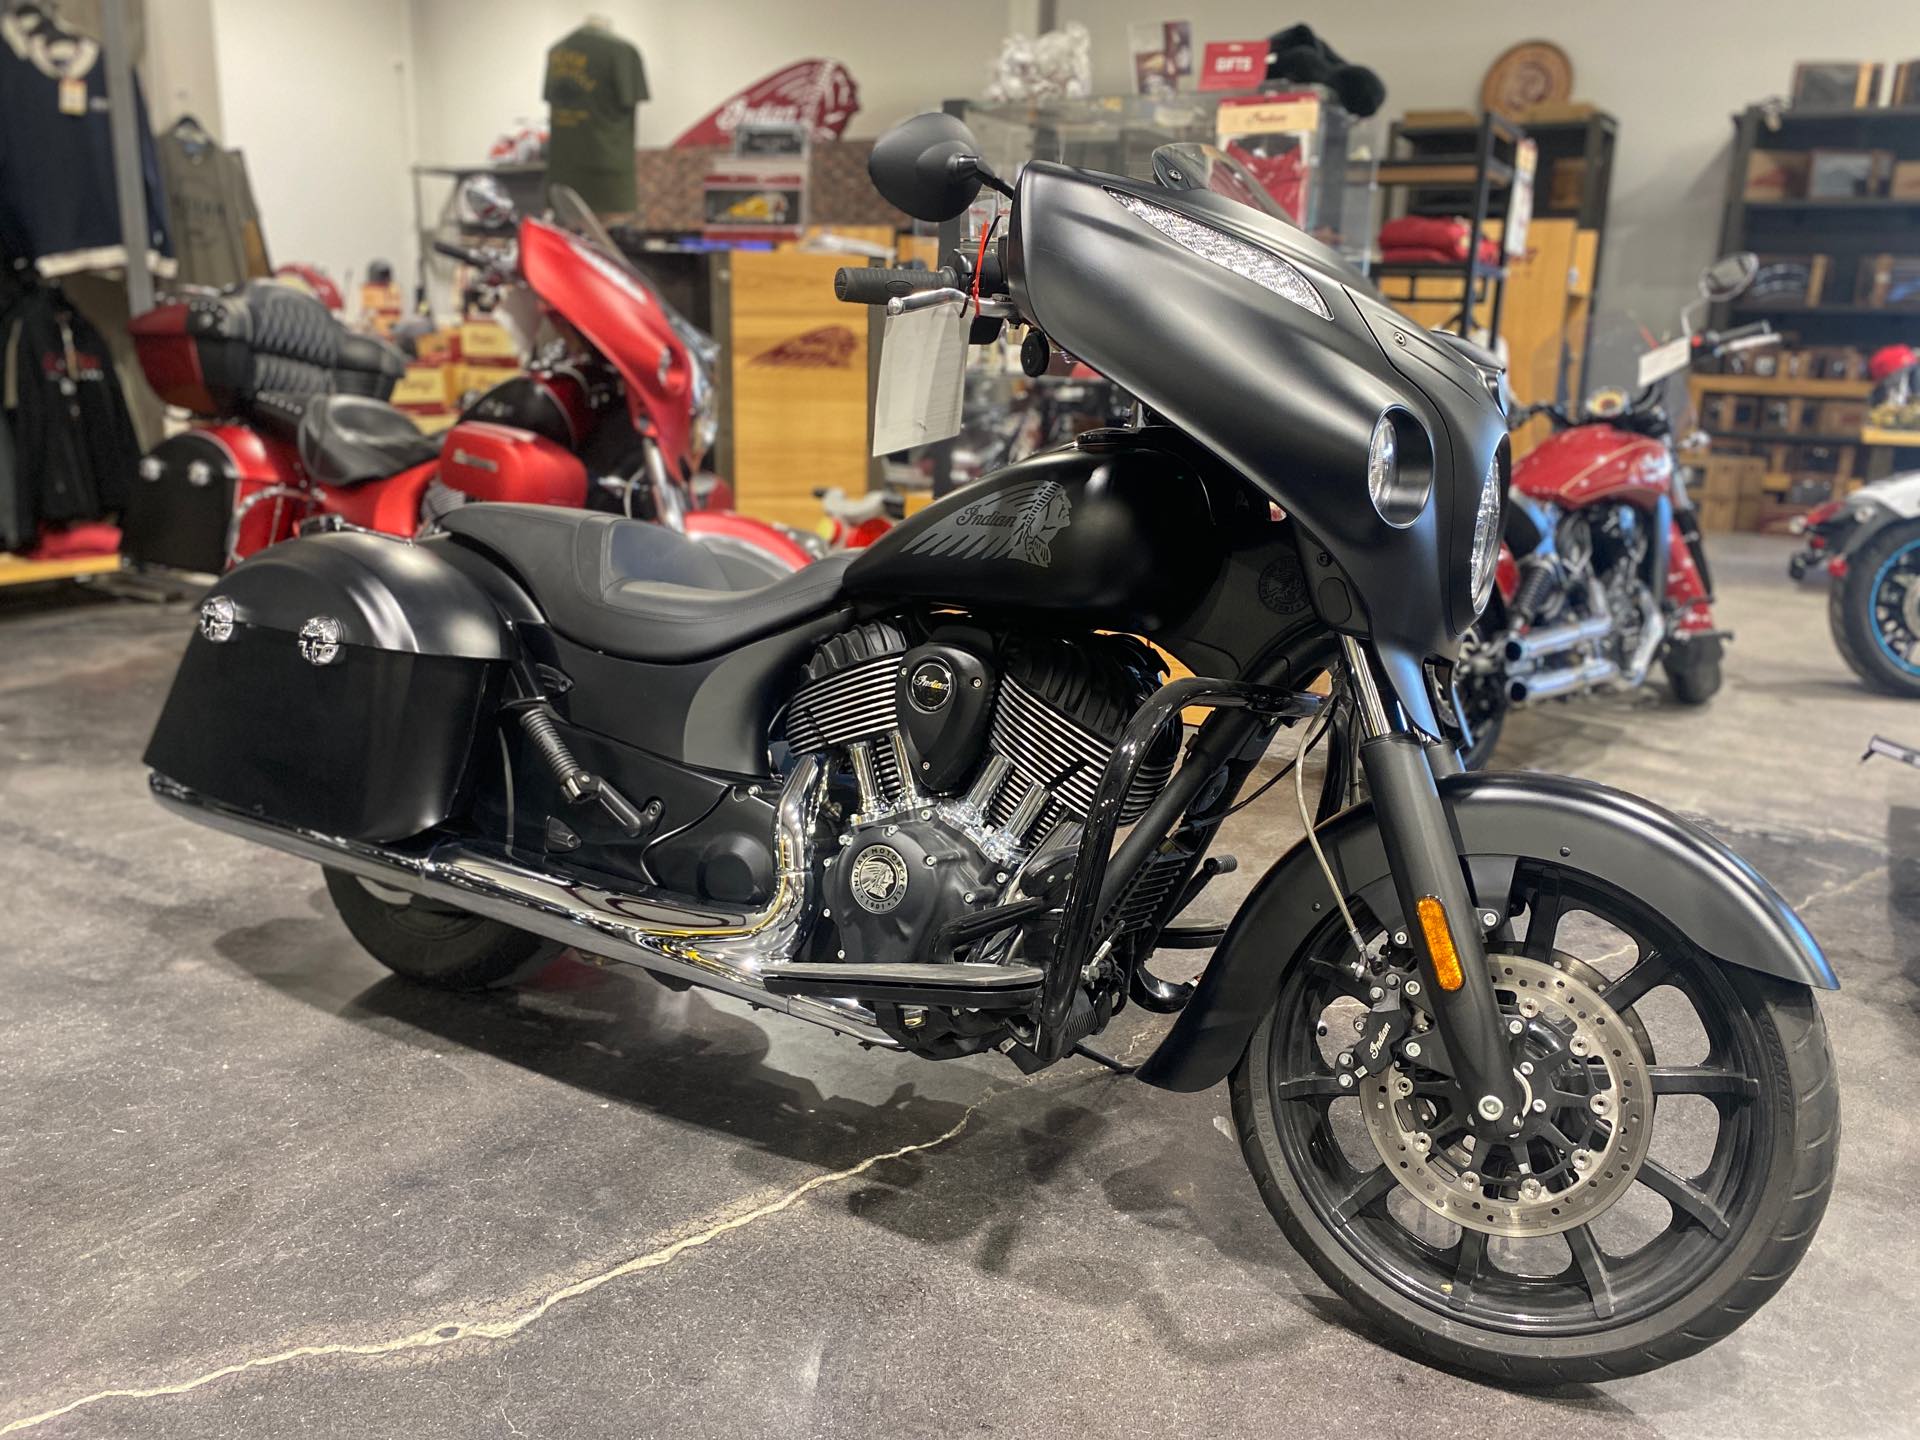 2018 Indian Chieftain Dark Horse at Head Indian Motorcycle